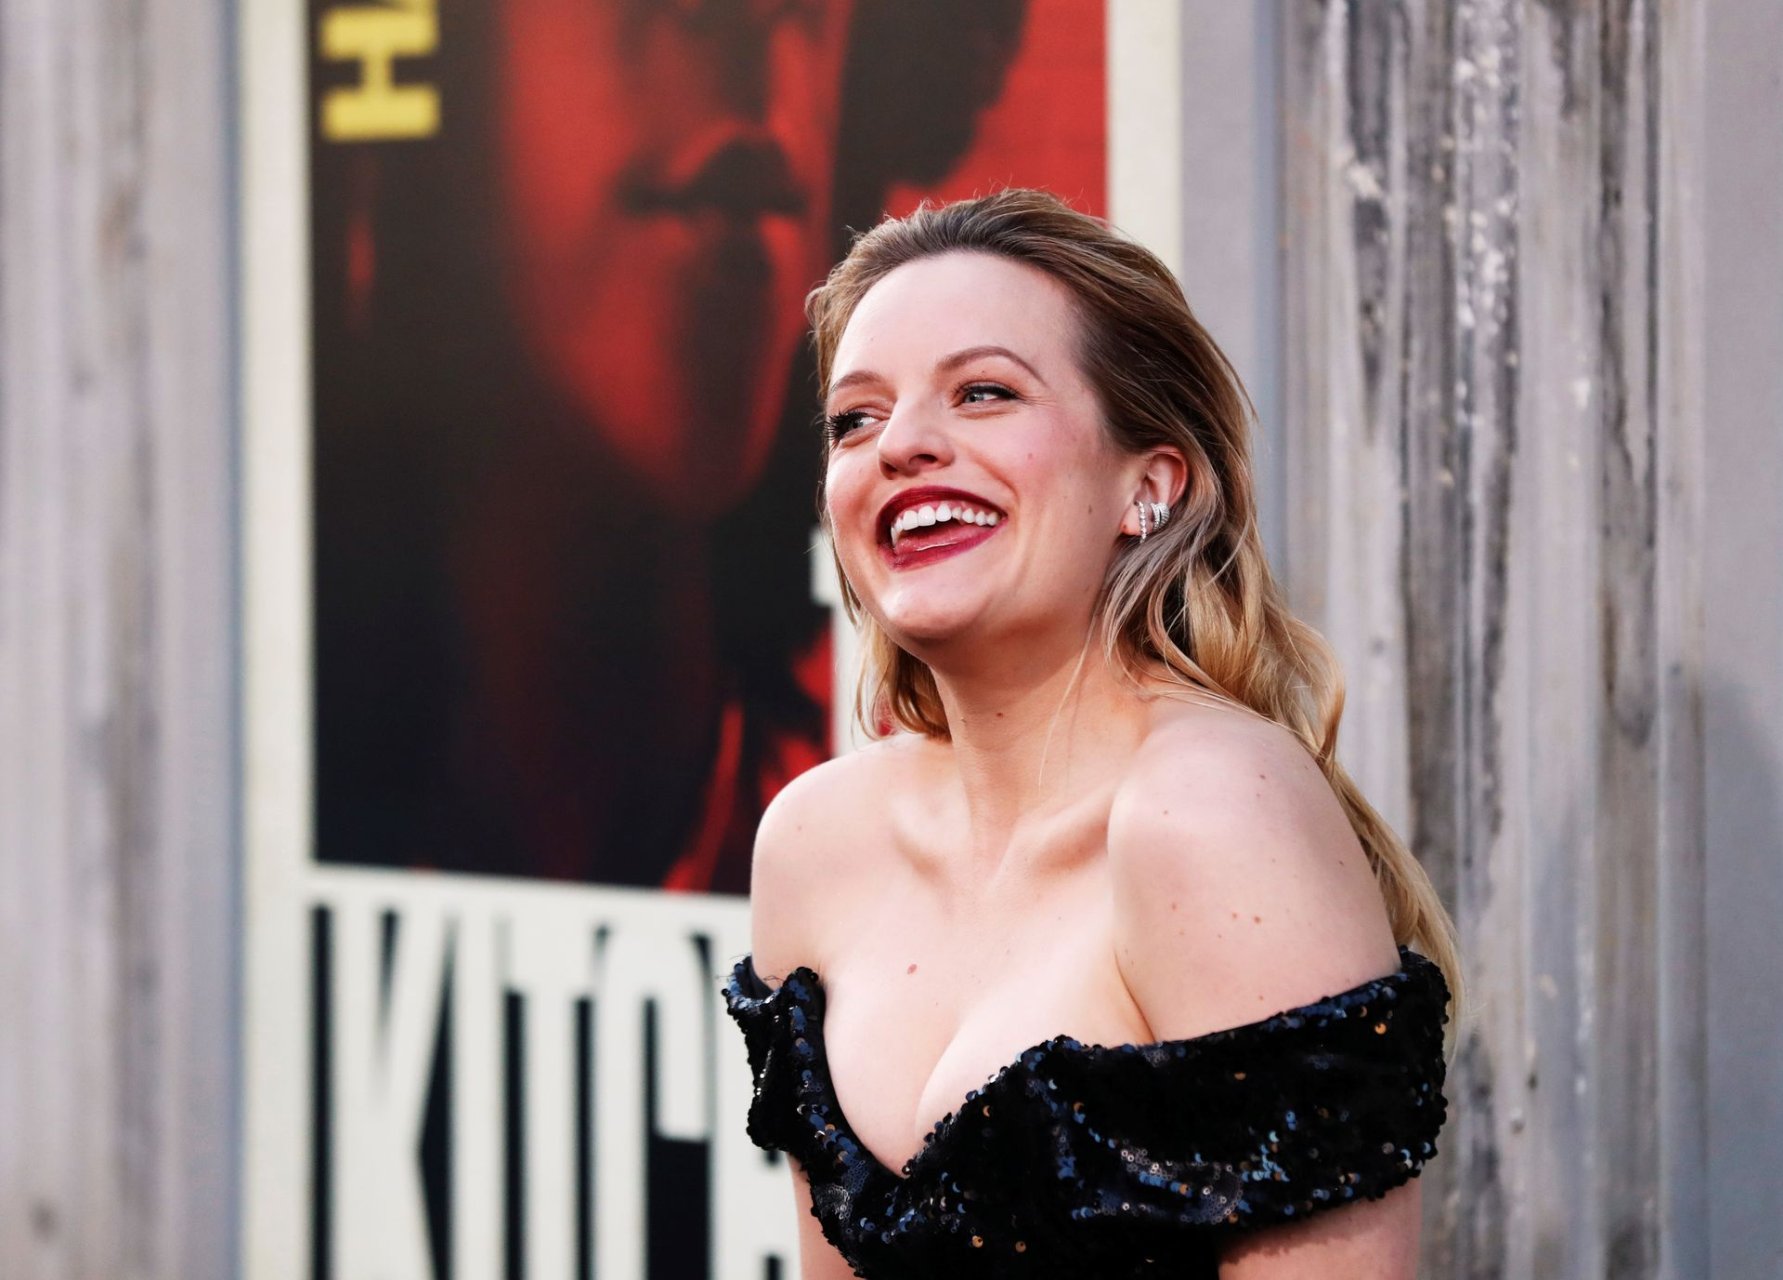 Elisabeth Moss showed off her cleavage and sexy legs at the premiere of War...